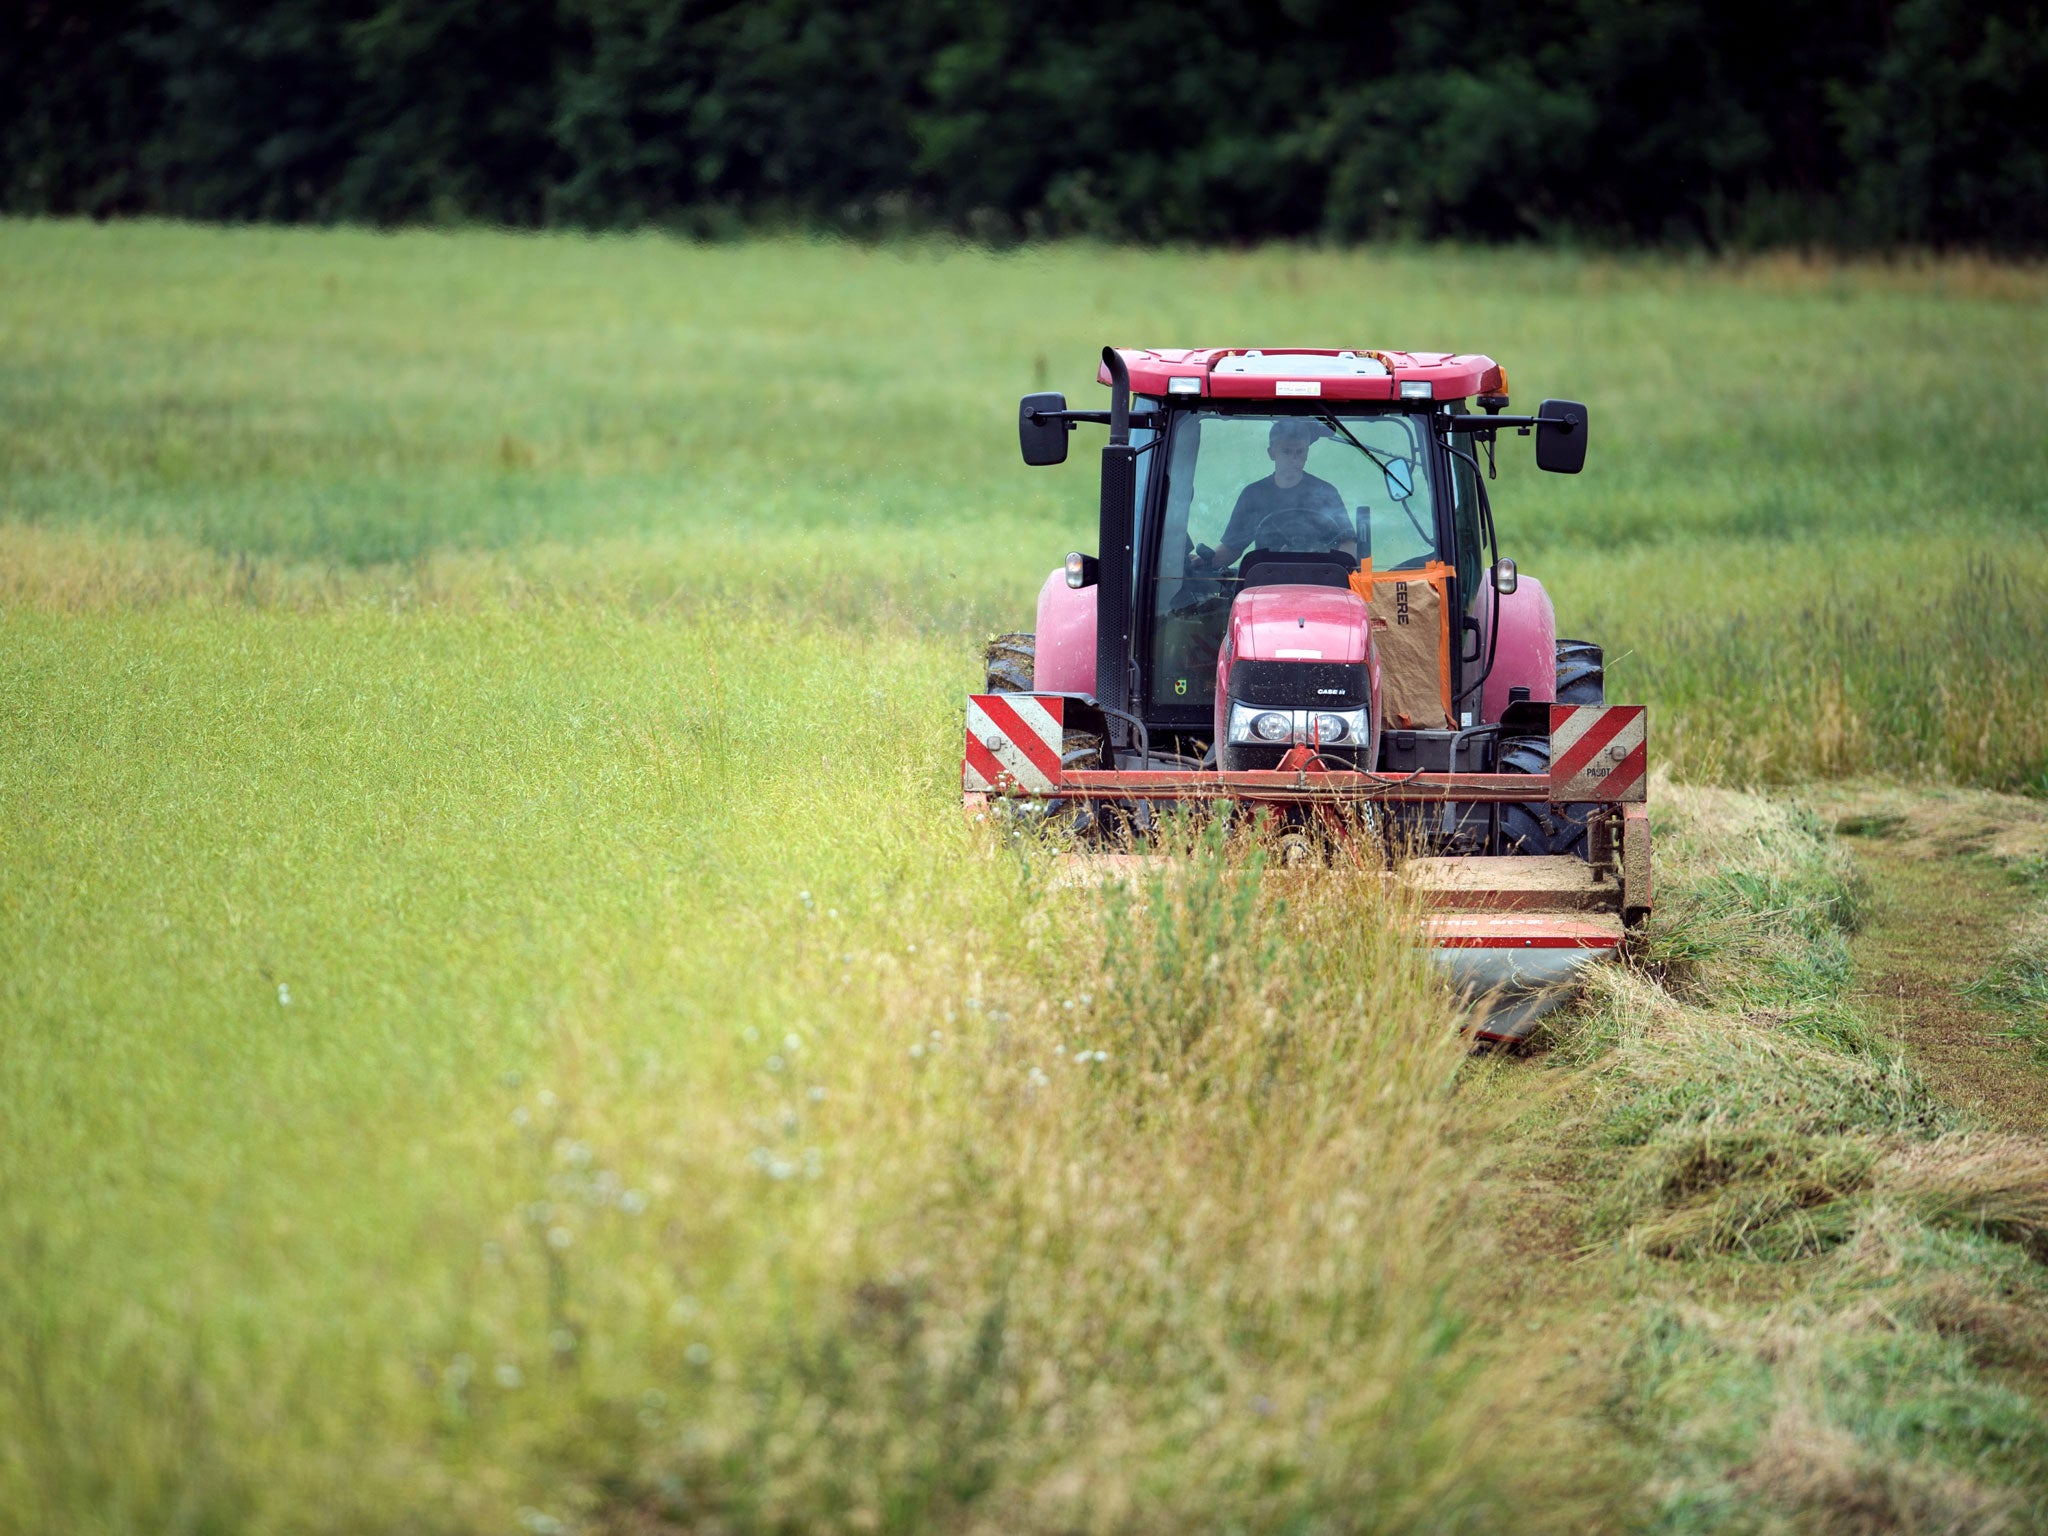 A farmer drives a tractor, unrelated to the incident involving Clouse, on a field in France.